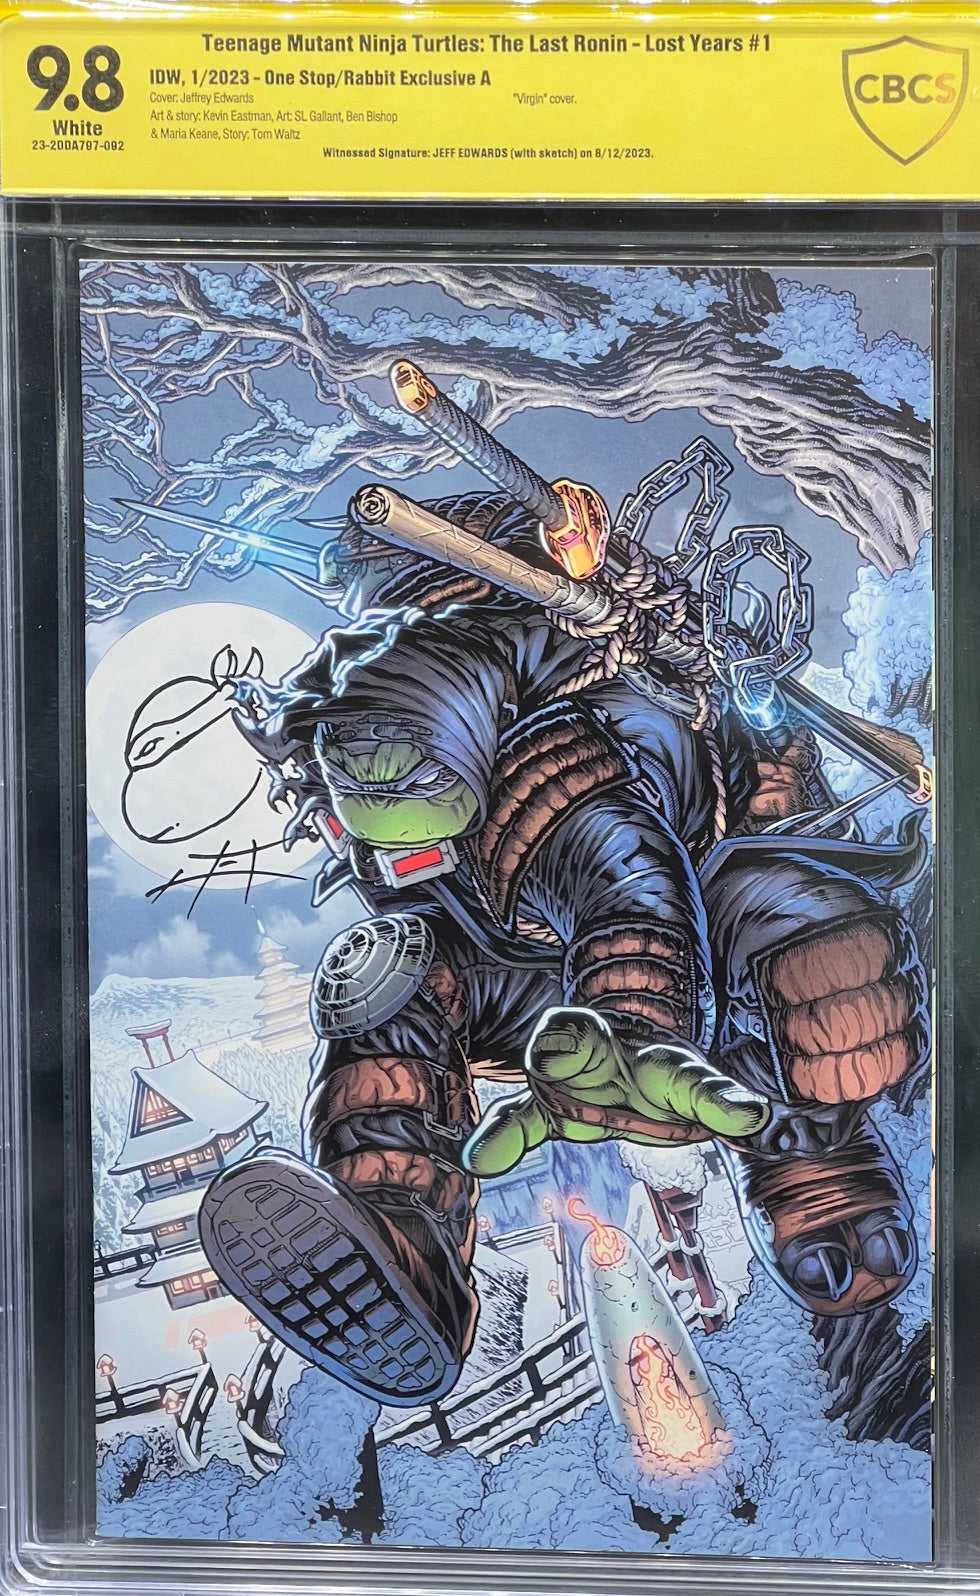 Teenage Mutant Ninja Turtles: The Last Ronin - Lost Years #1 One Stop/Rabbit Exclusive A CBCS 9.8 Yellow Label Jeff Edwards